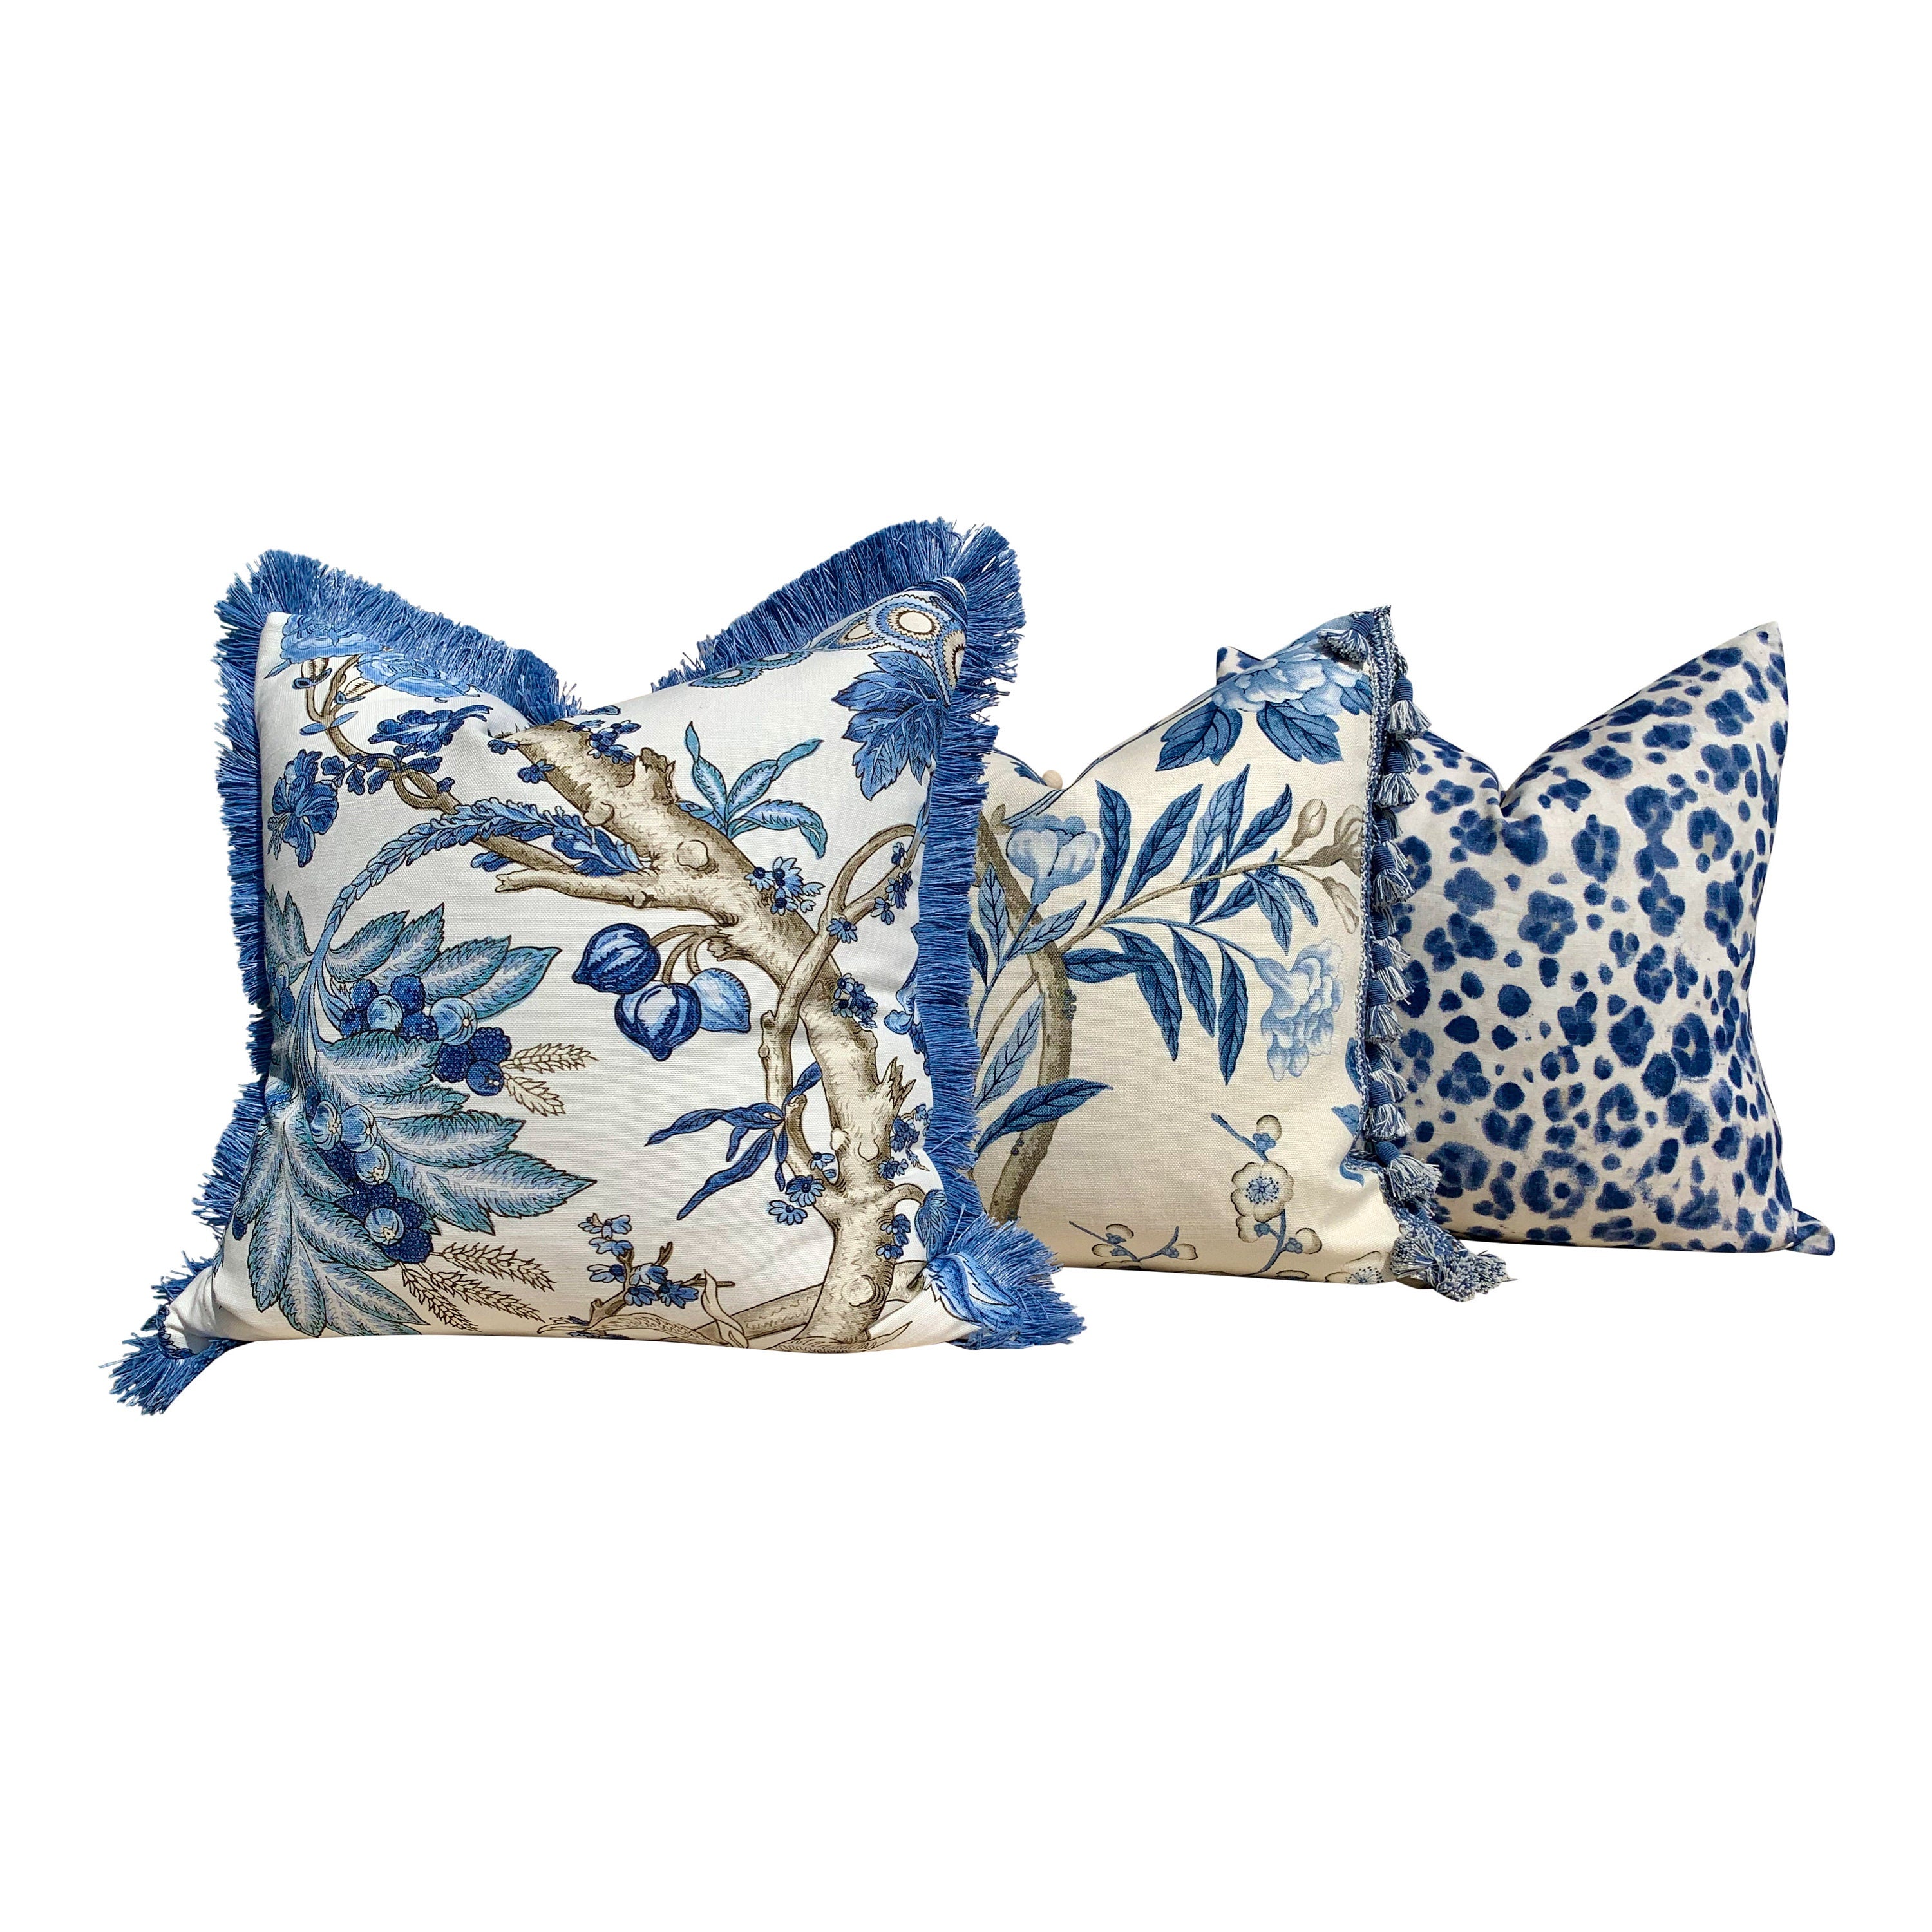 Chatelain French Blue Pillow , Brush Fringe. Floral French Country Blue and White Pillow Cover, Decorative Lumbar Cushion Euro Sham 26x26